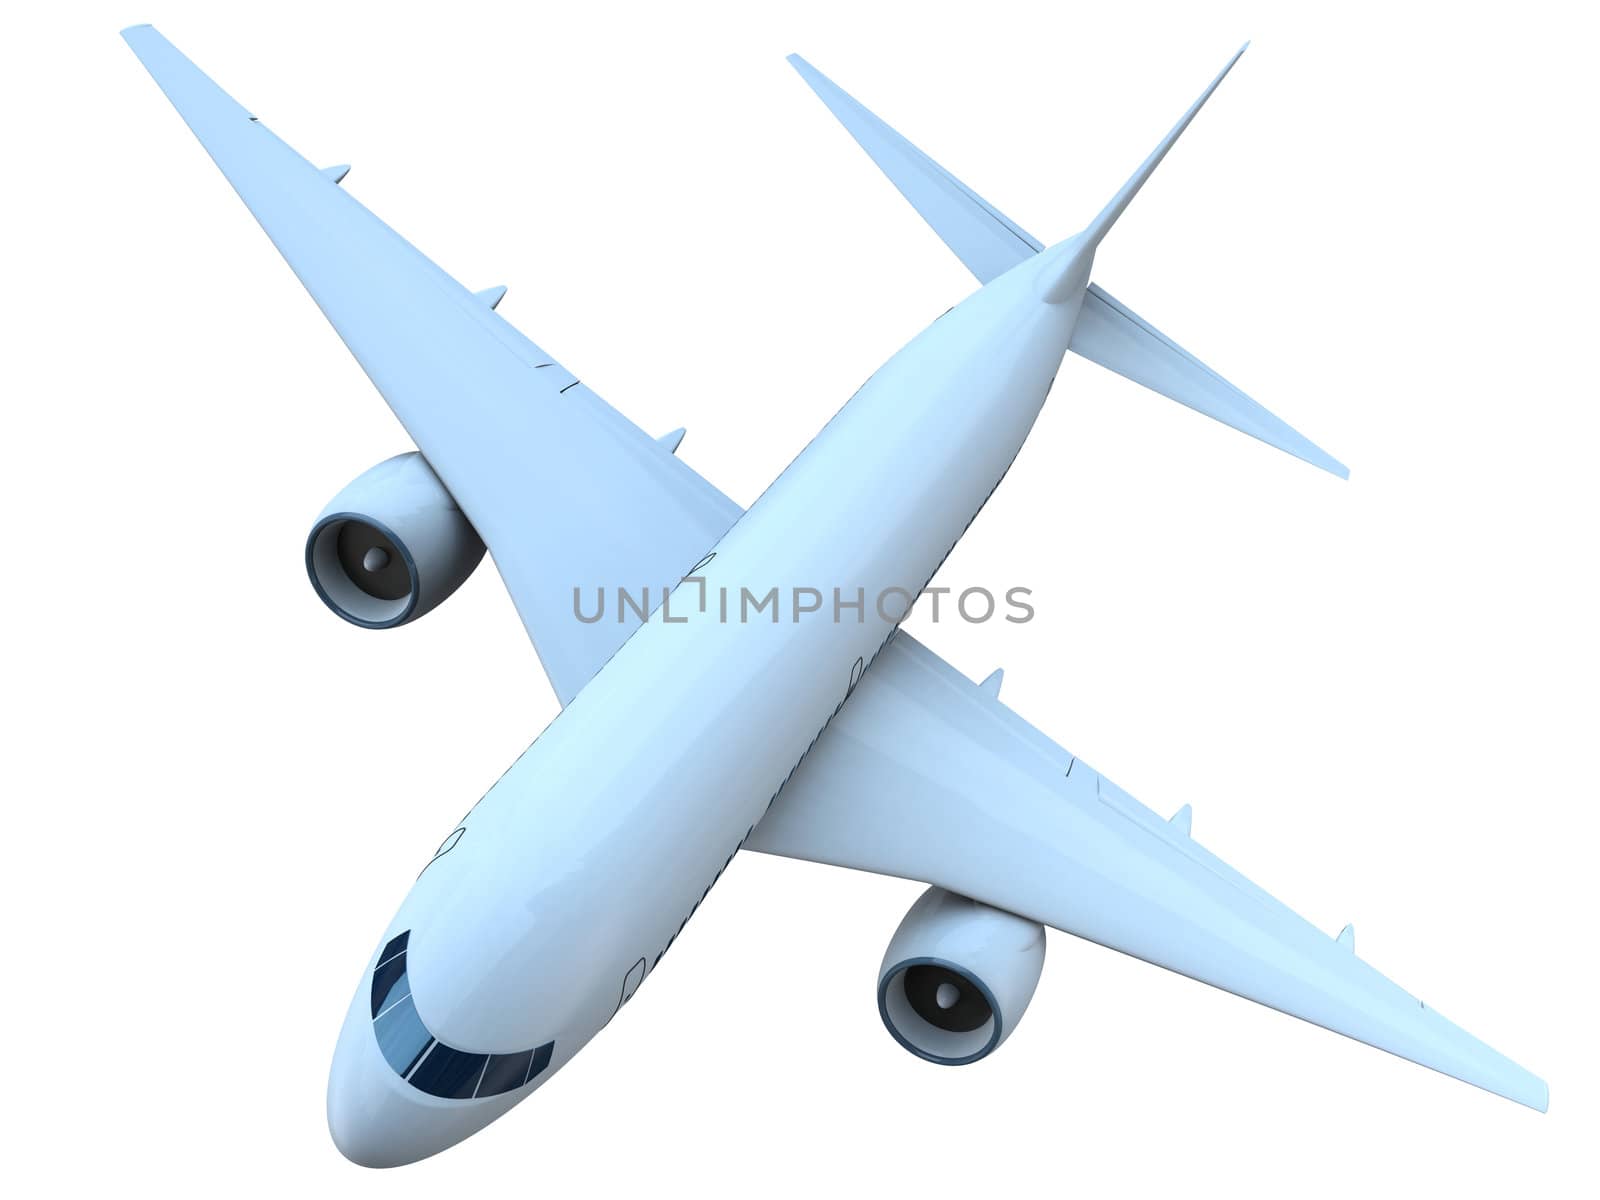 Top view of a flying passenger aircraft isolated on white background